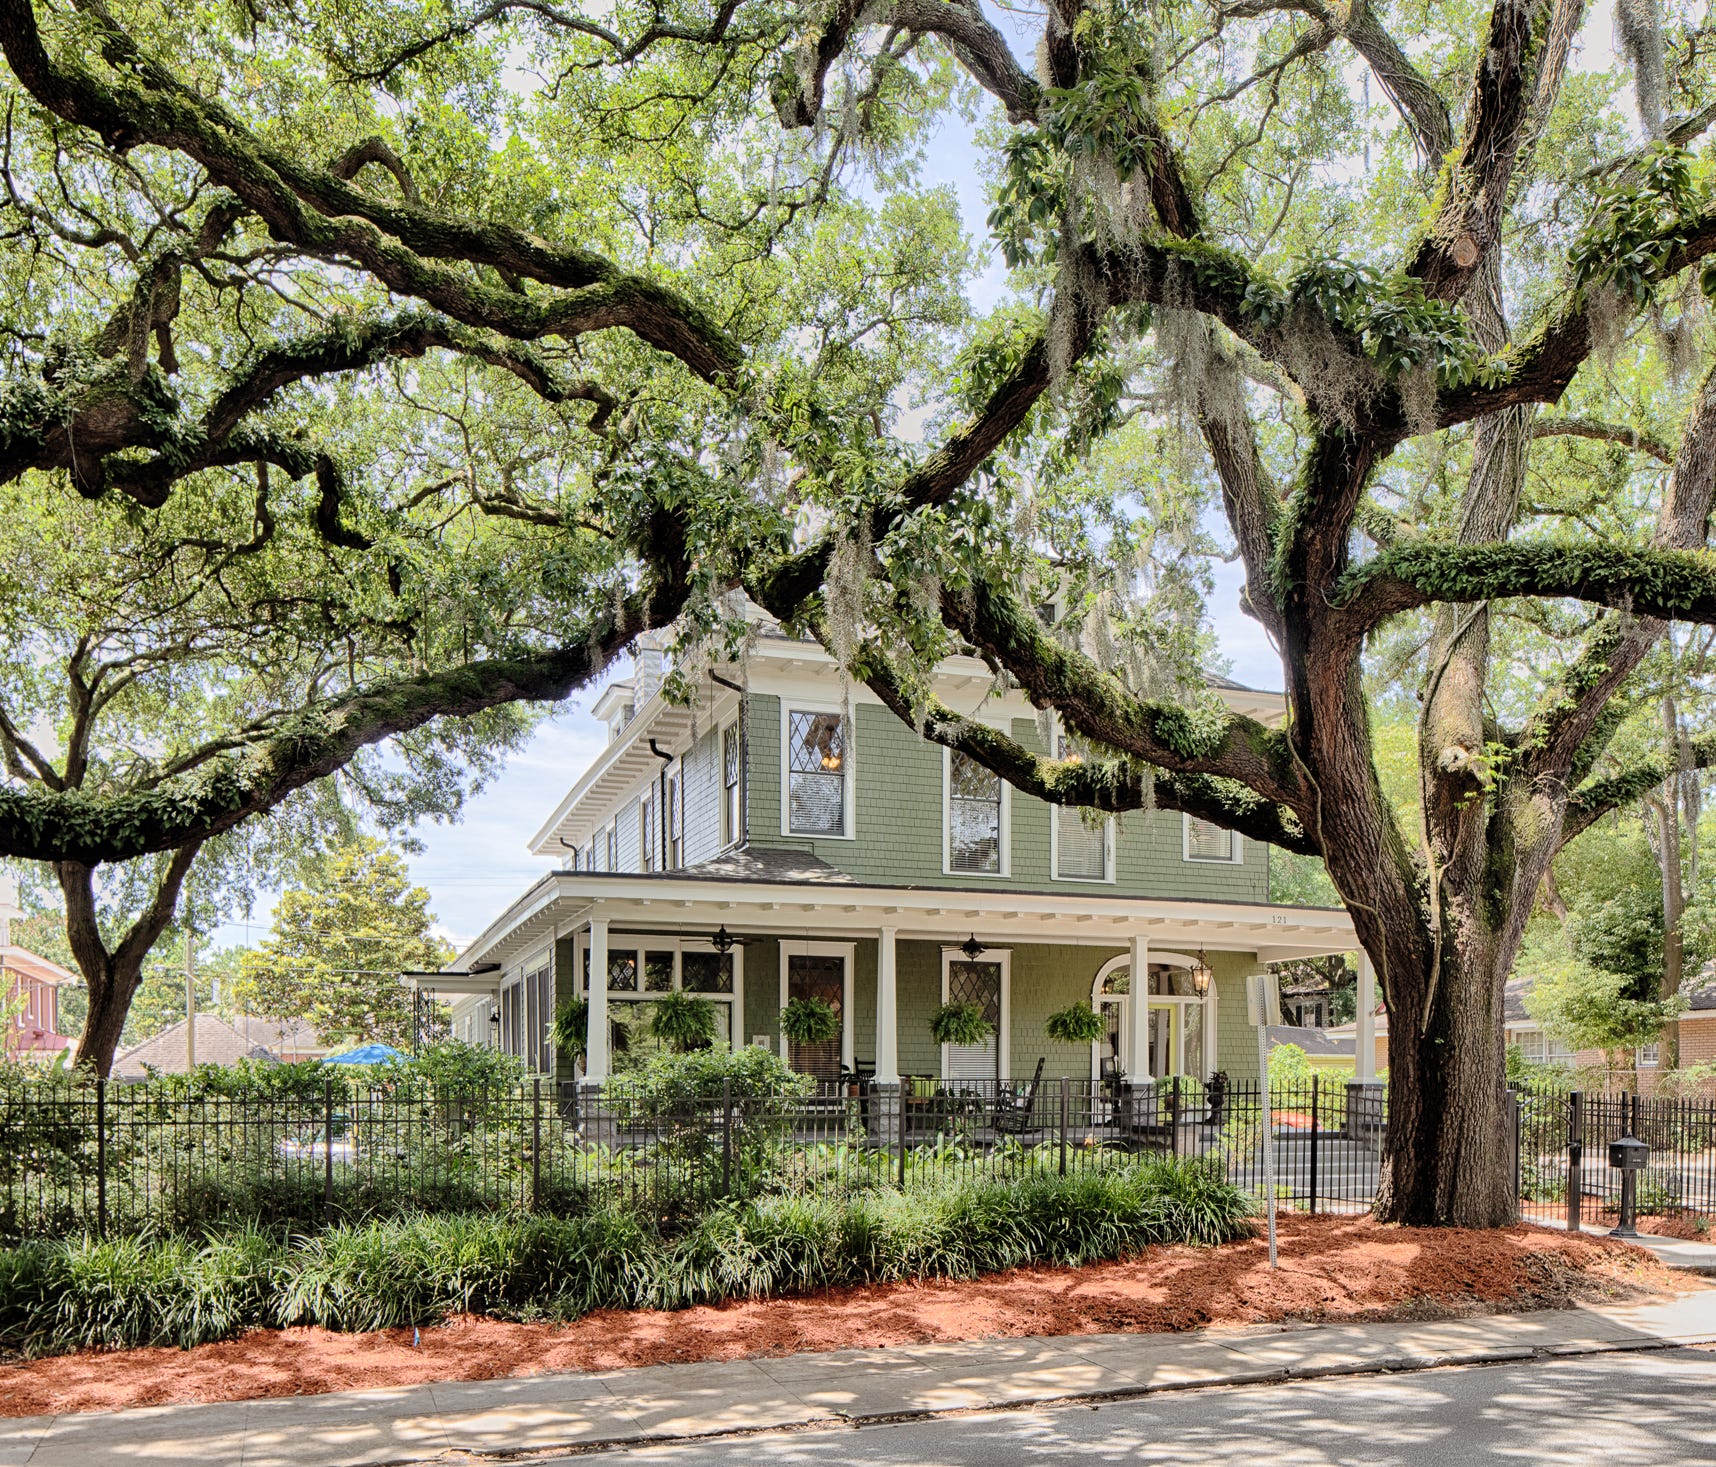 This Ardsley Park Victorian mansion, built circa 1913 and located at 121 E. Victory Drive, is listed in Savannah, Georgia, for $849,000. It has an expansive front porch, seven bedrooms and five bathrooms, eight fireplaces, an elevator, and a swimming